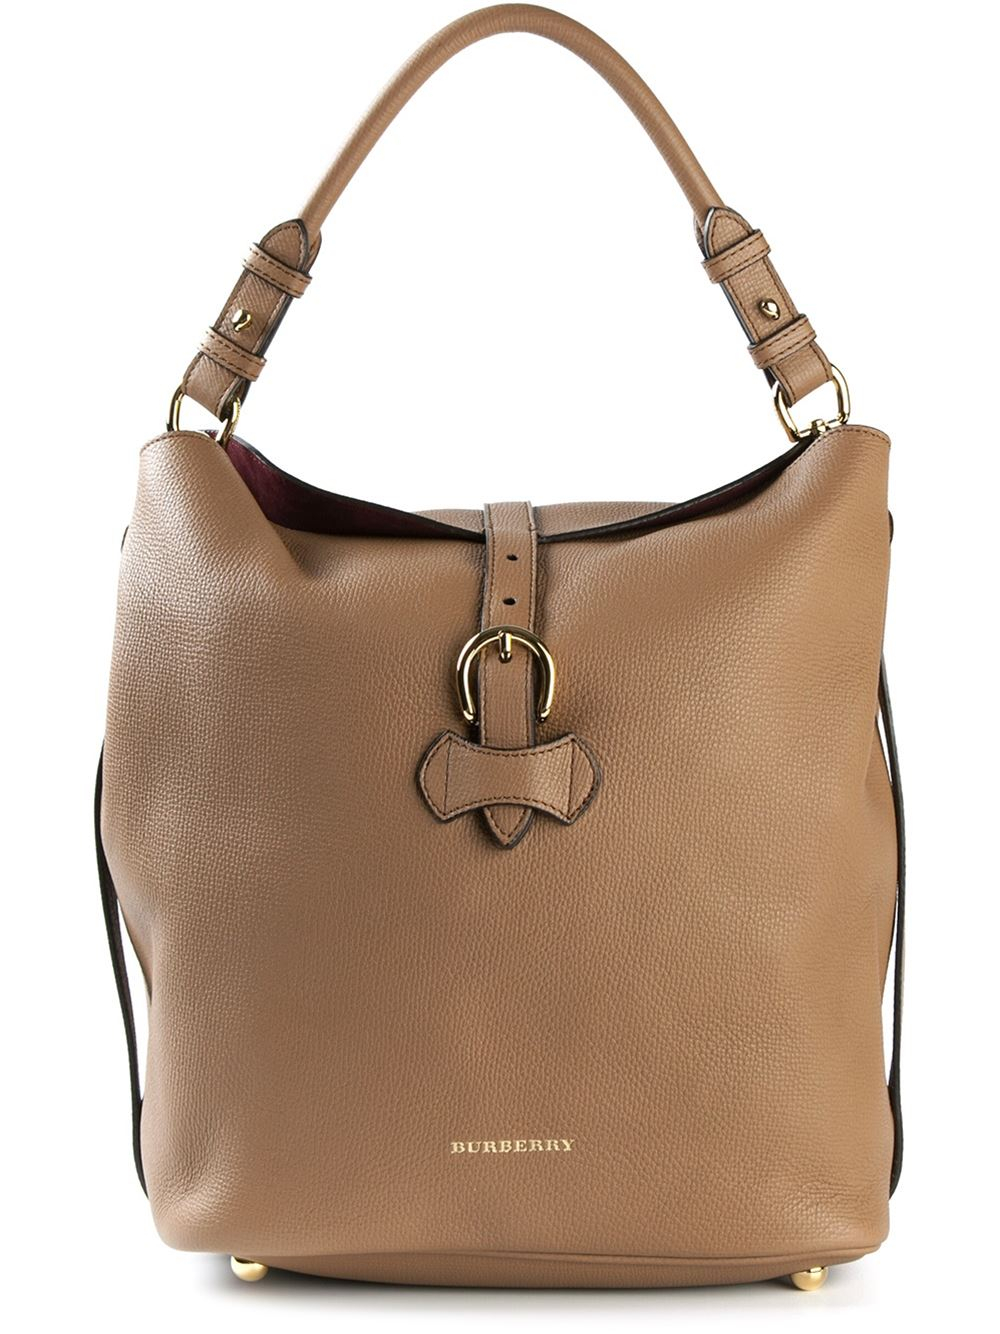 Burberry Classic Leather Shoulder Bag in Brown | Lyst